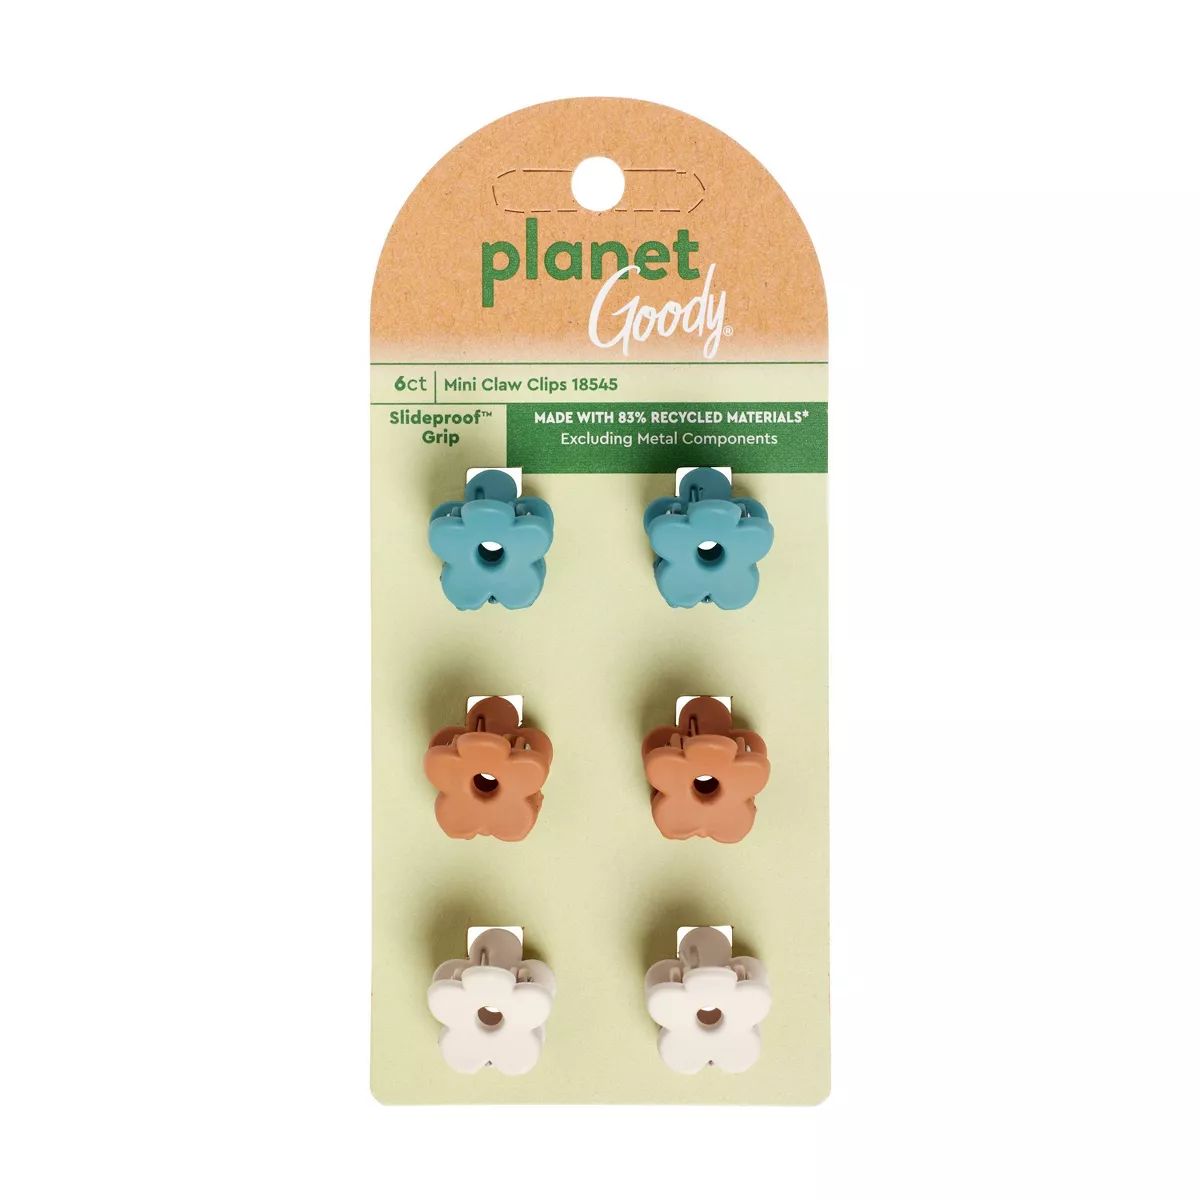 Planet Goody Mini Flower Claw Clips - 6ct | Target